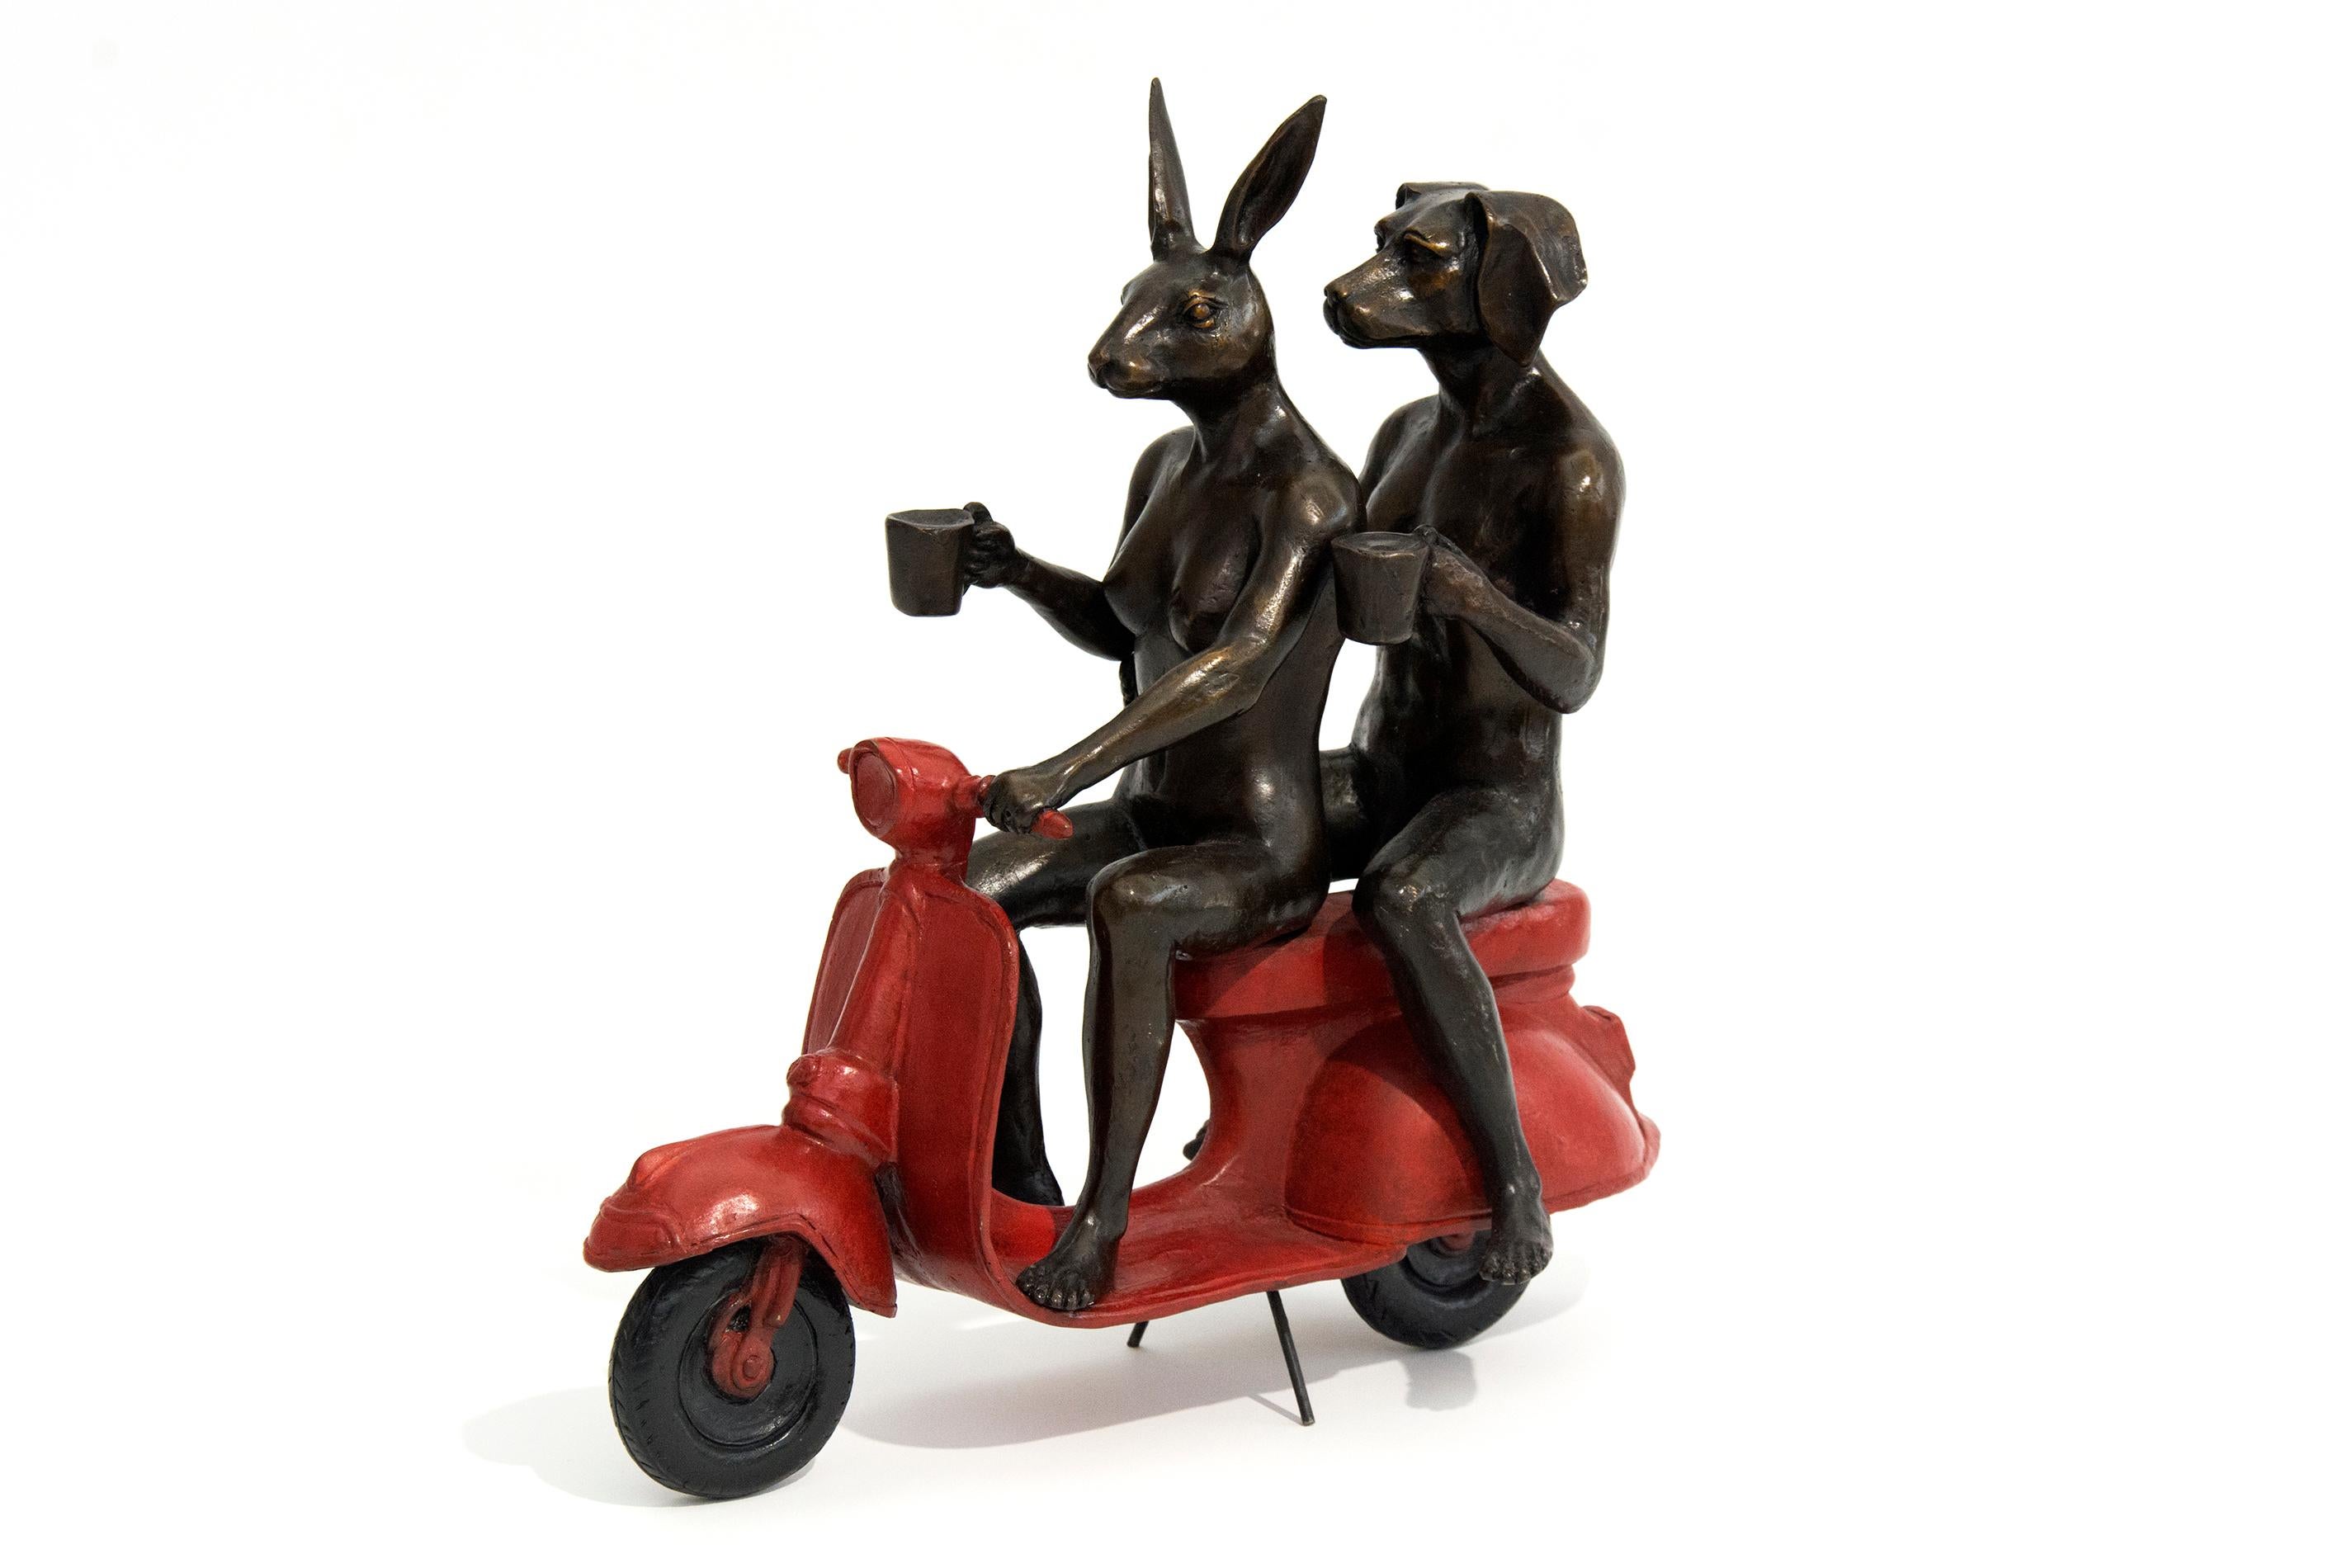 Gillie and Marc Schattner Figurative Sculpture - Their morning ride started with coffee and a kiss - playful, bronze sculpture